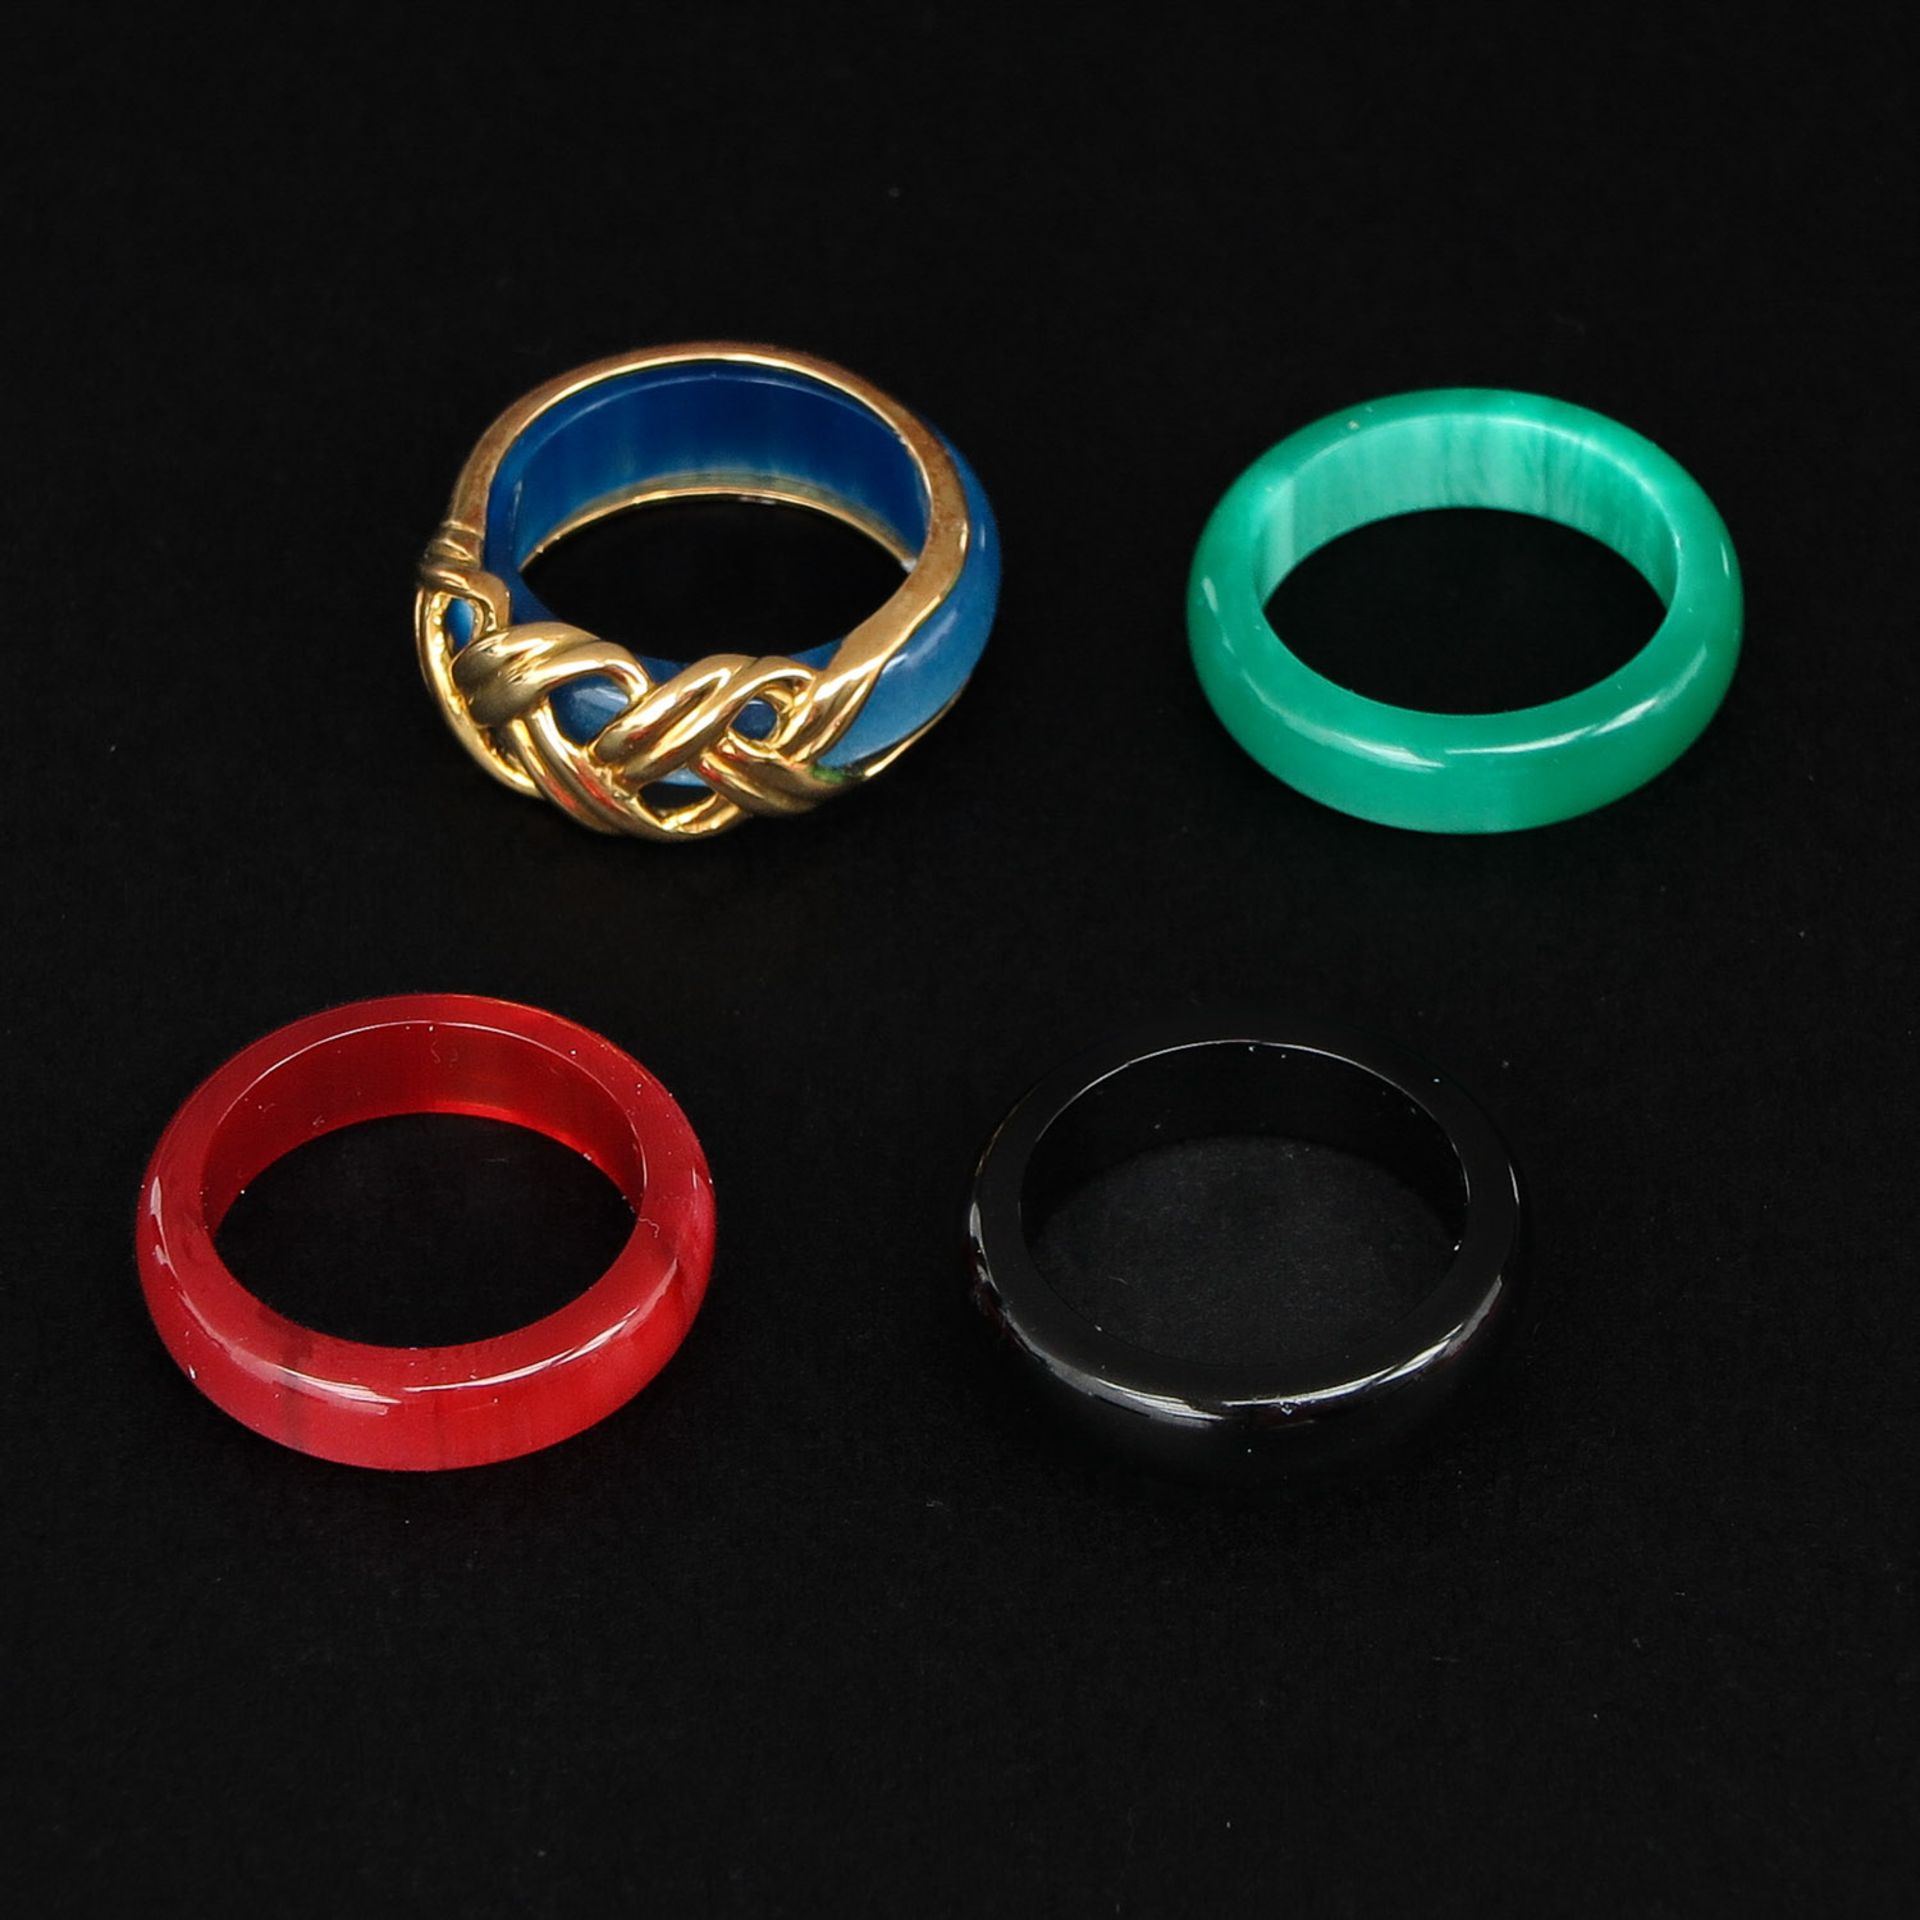 An 18KG Ring with Interchangeable Bands